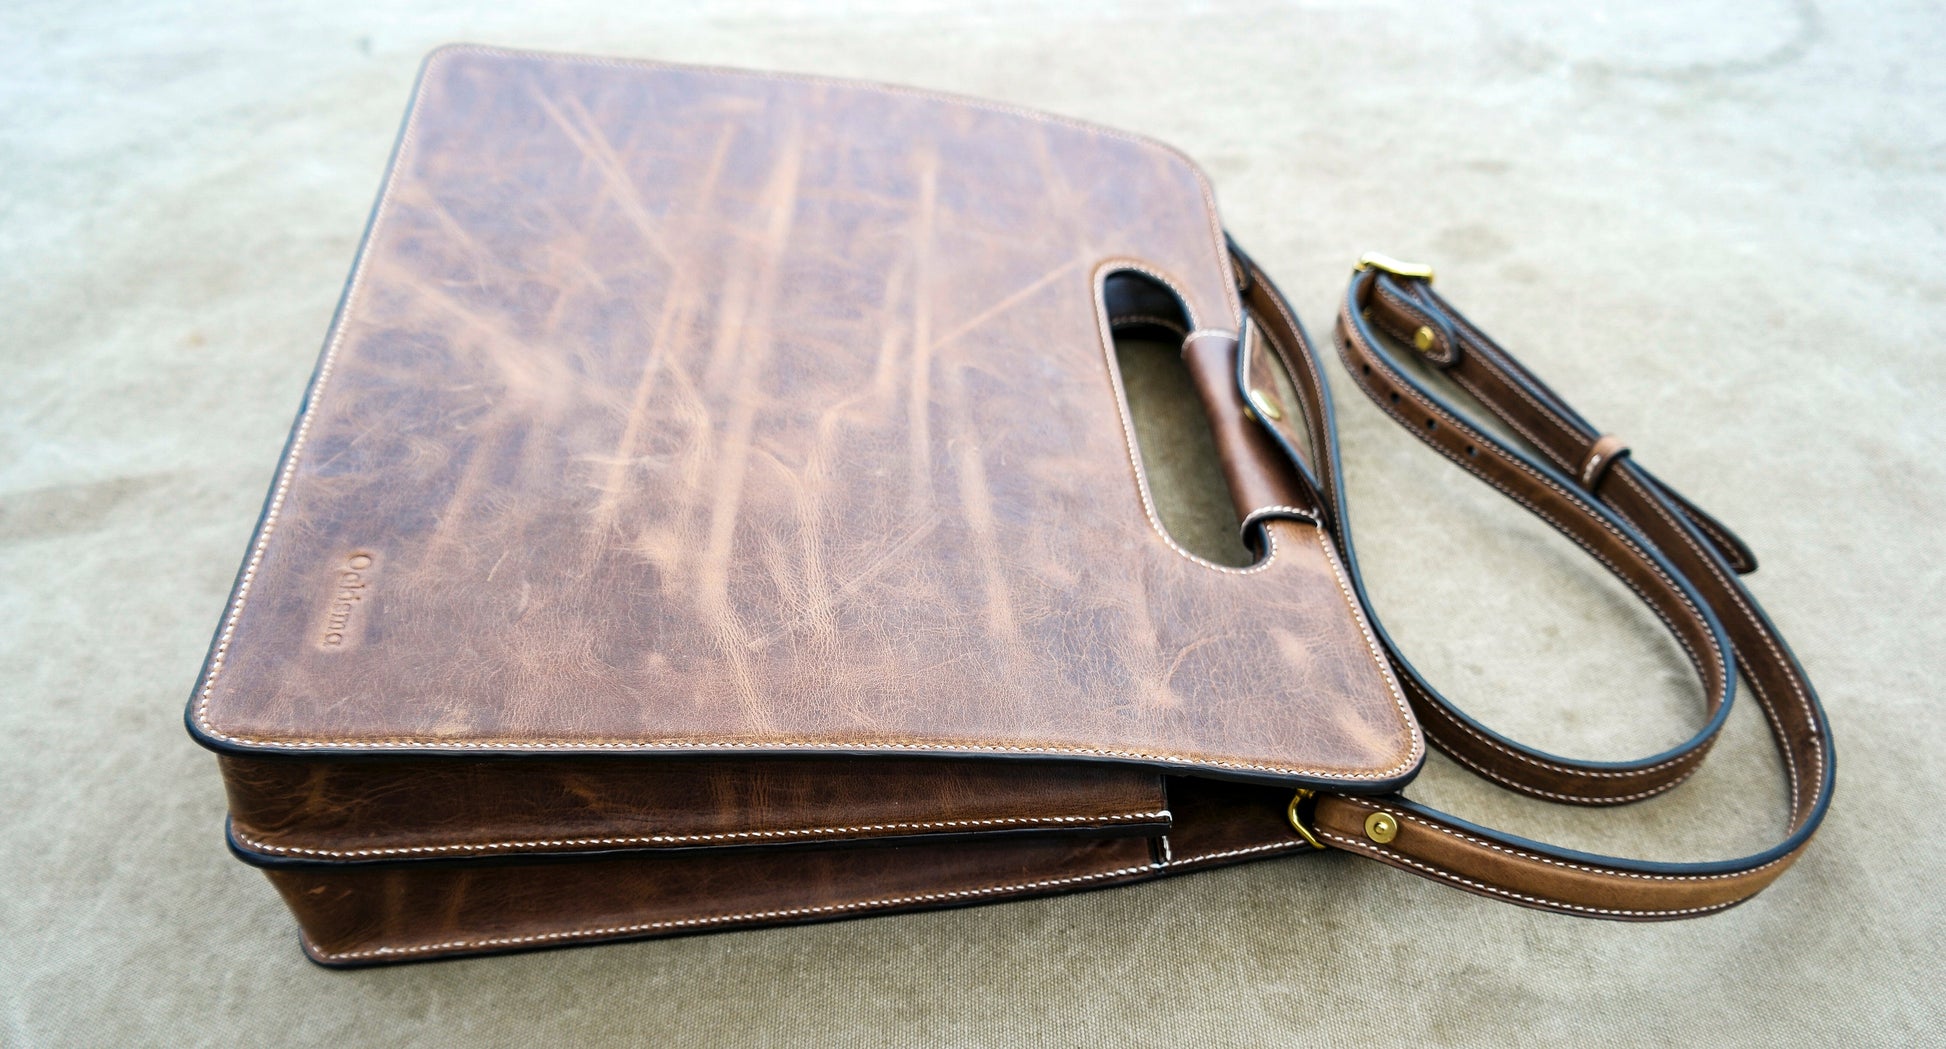 【Physical Patterns】Portable briefcase,Briefcase For Files,Laptop bag Pattern,Men's Leather Briefcase Pattern